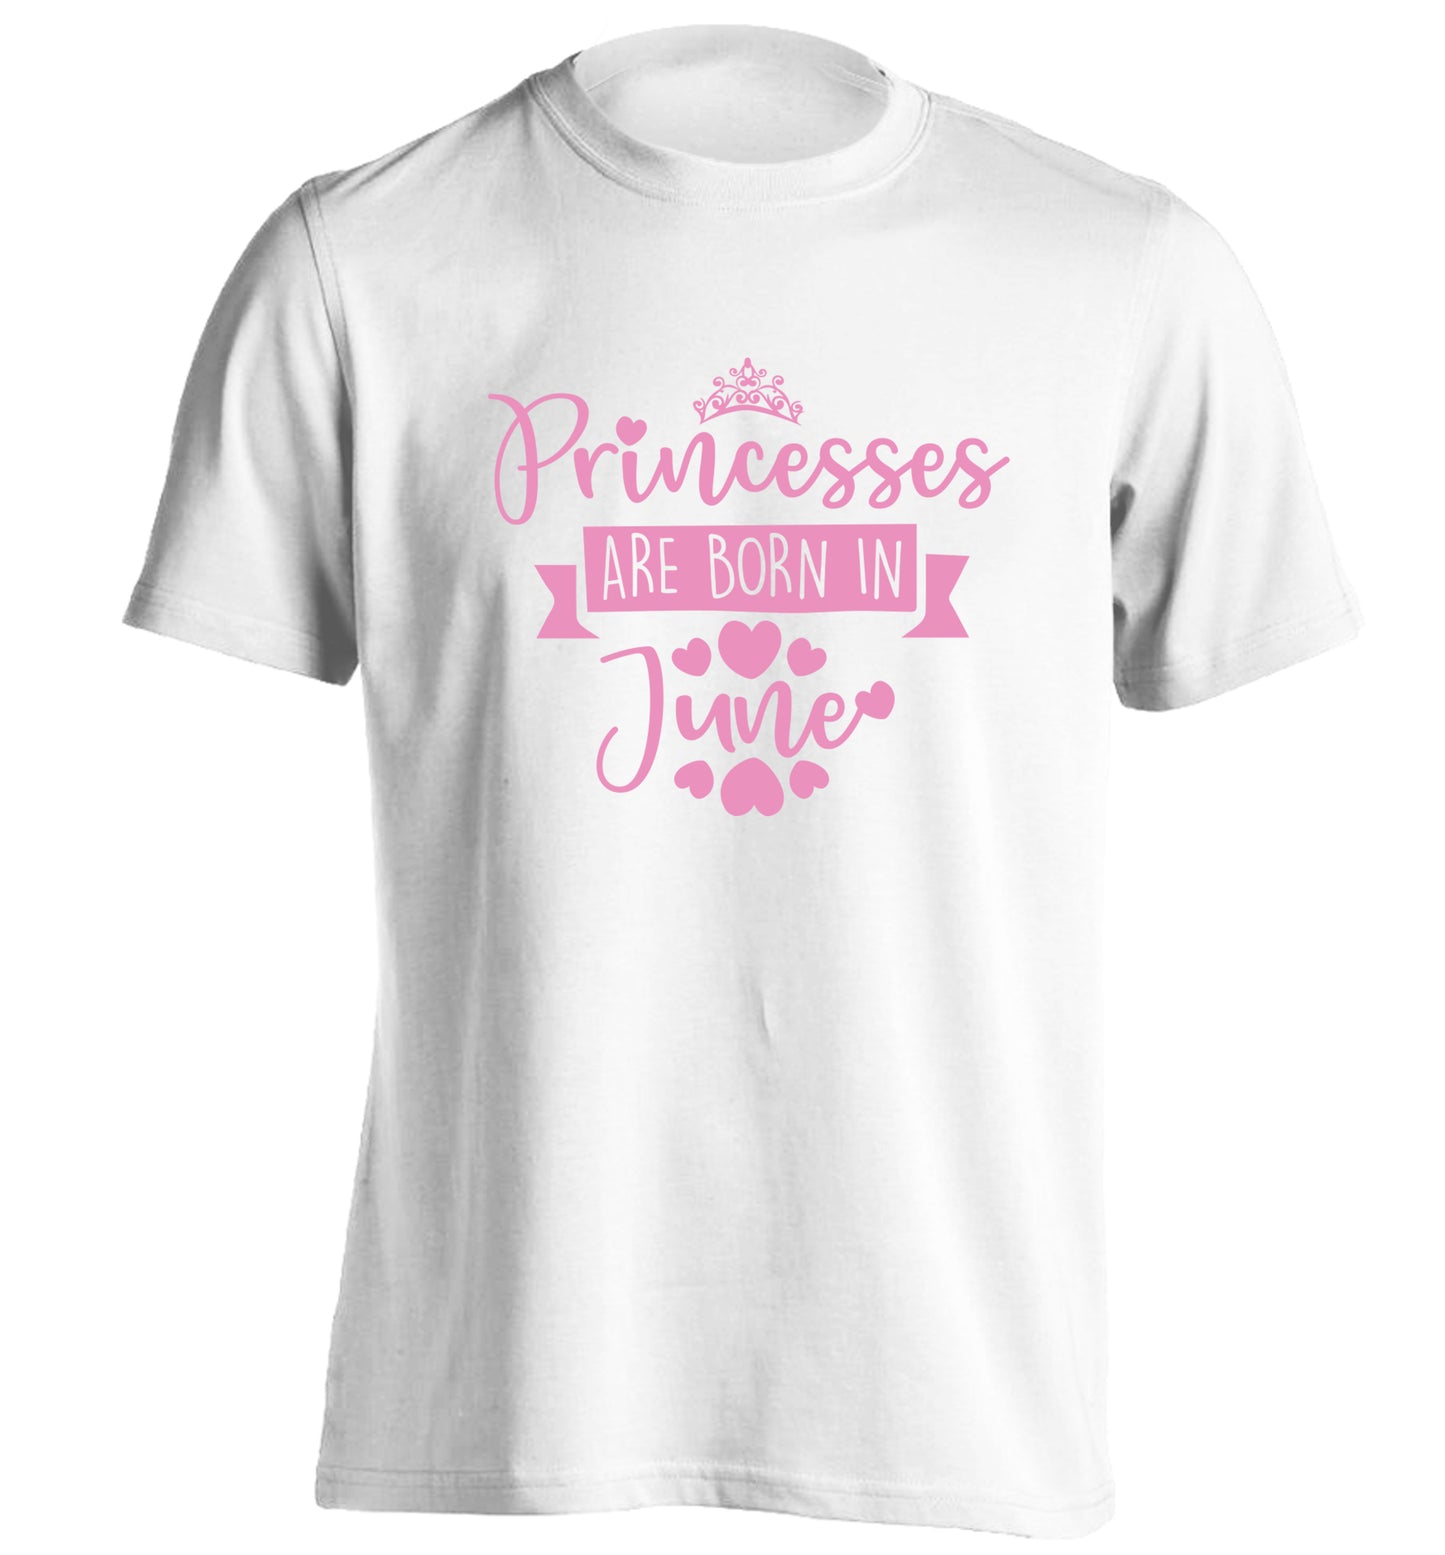 Princesses are born in June adults unisex white Tshirt 2XL